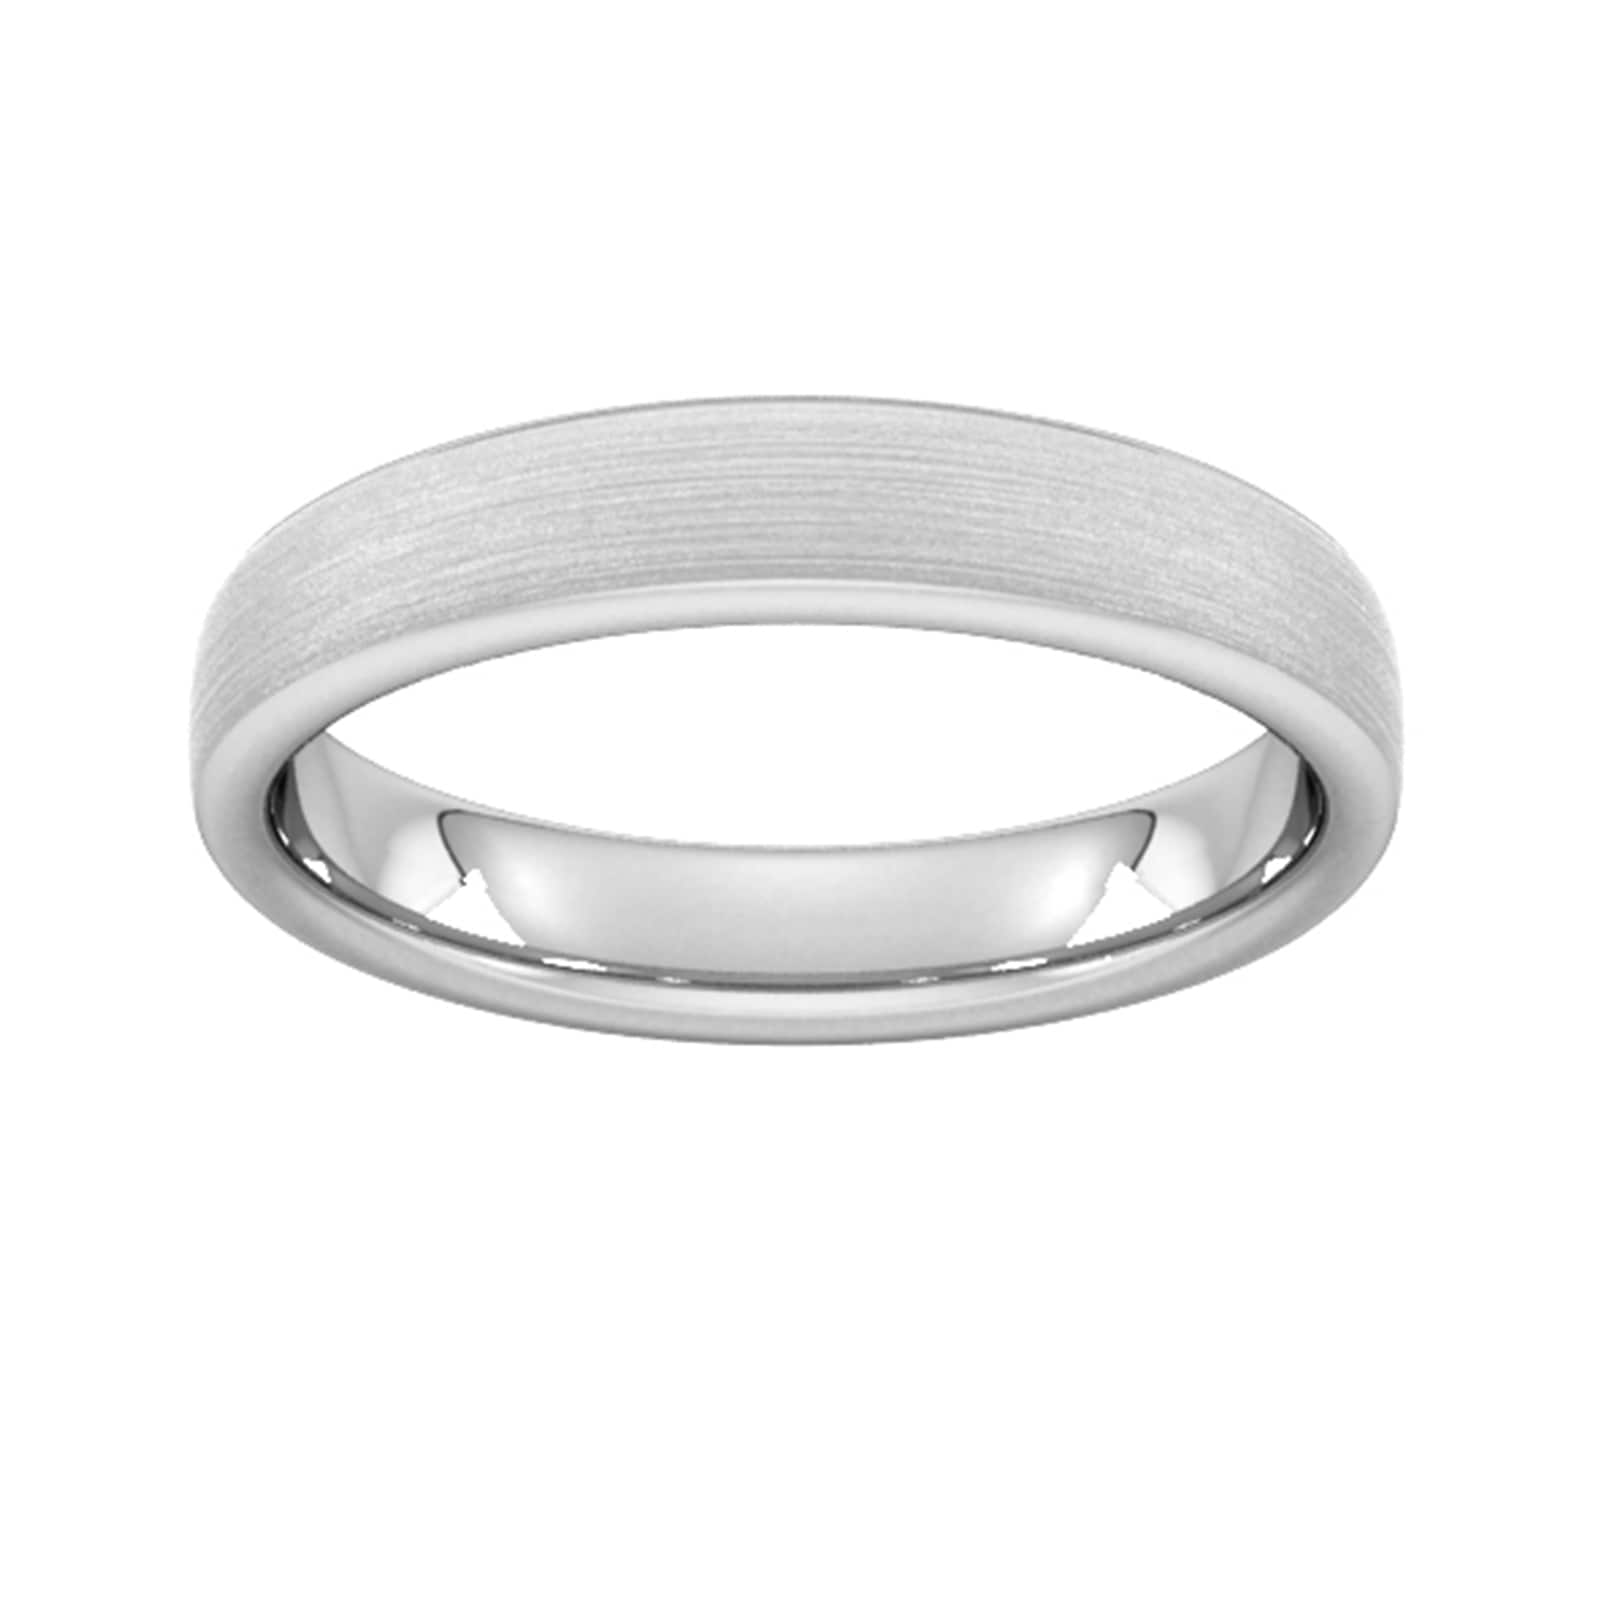 4mm Flat Court Heavy Matt Finished Wedding Ring In 18 Carat White Gold - Ring Size N